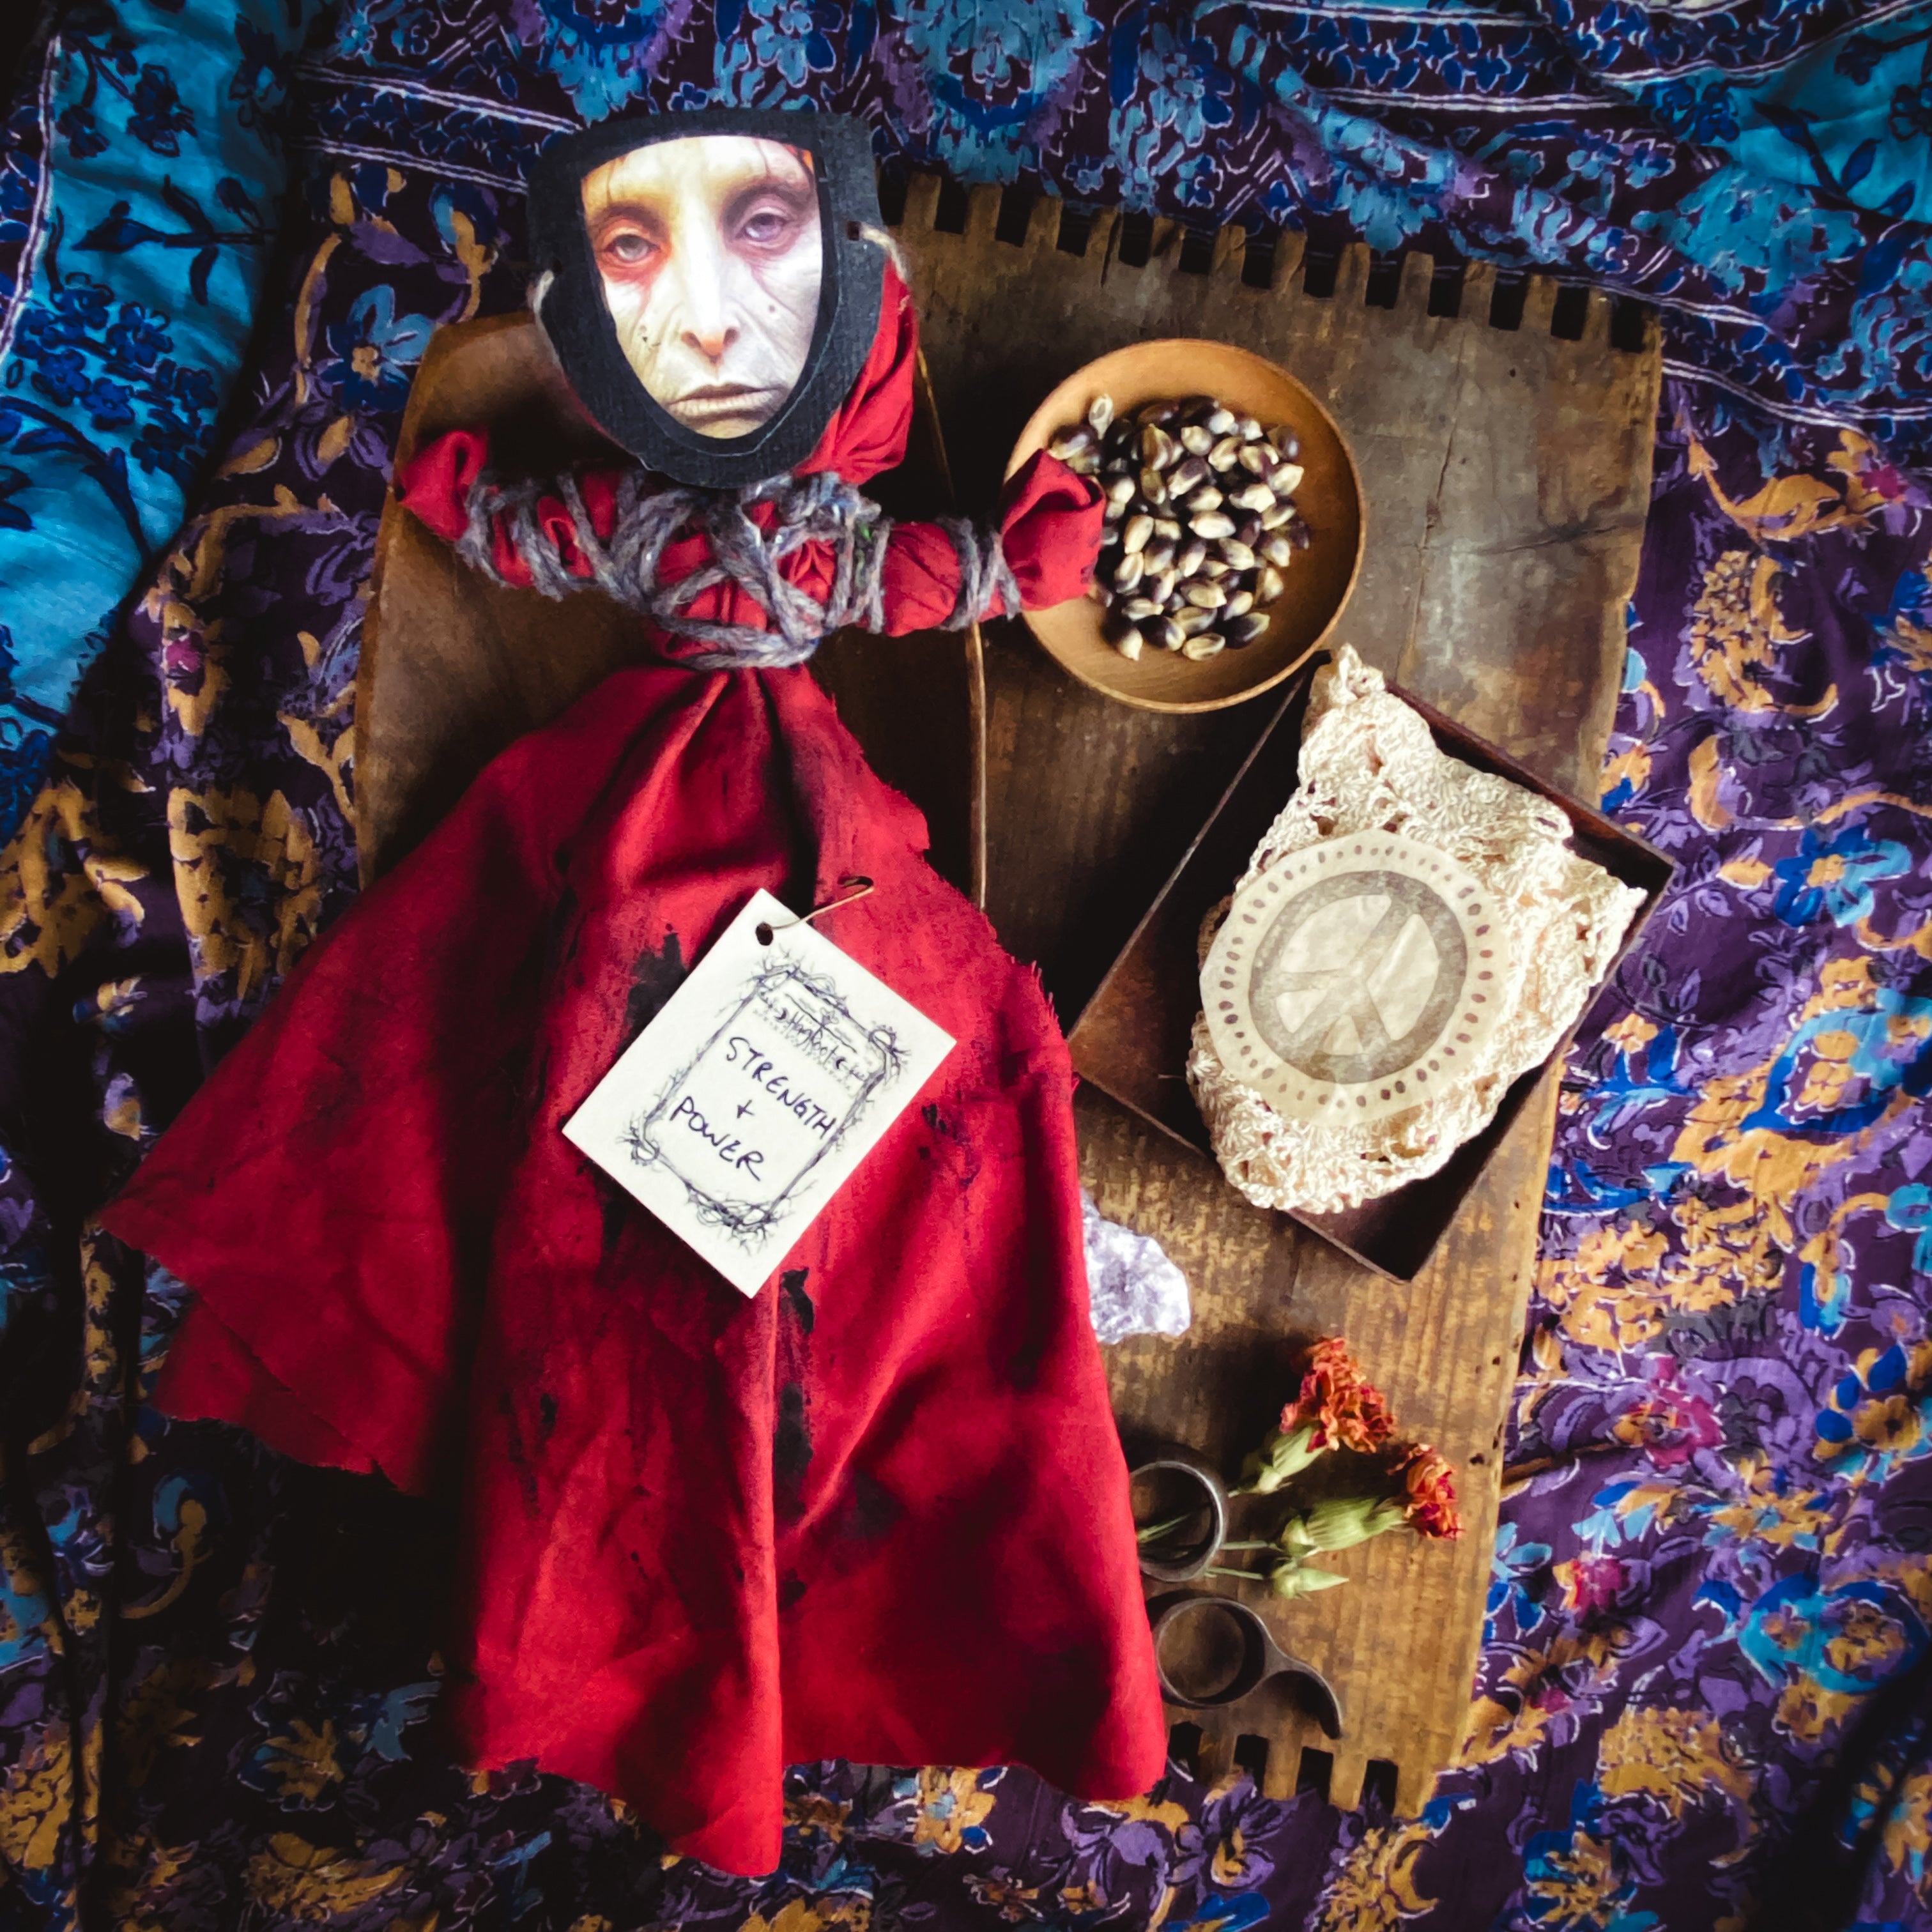 INTENTION DOLL FOR STRENGTH + POWER Containing Herbs, Roots, Stones, Snake Skin, Shells - Poppet, Conjure Doll, Medicine Doll, Spirit Doll